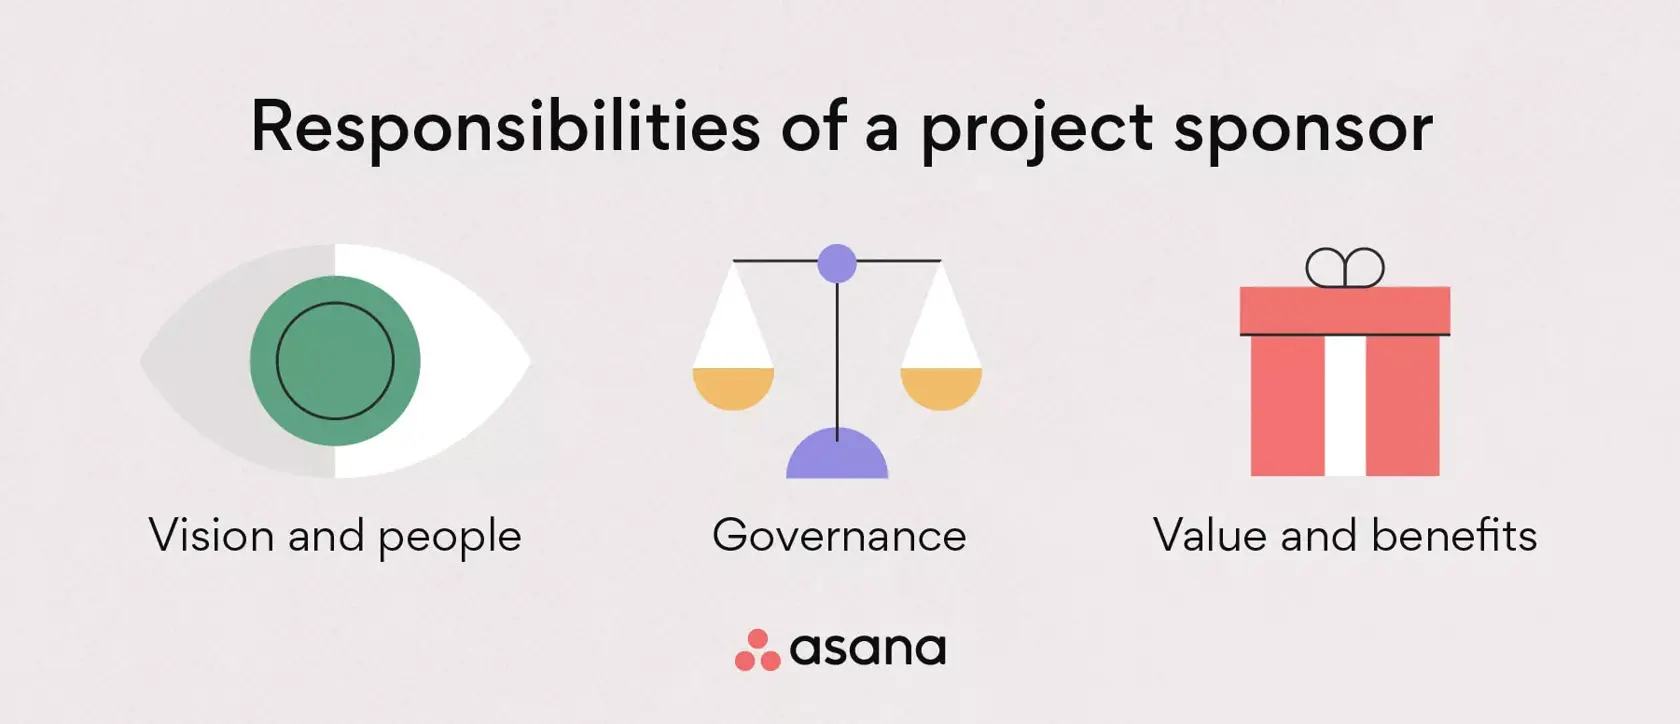 [inline illustration] Responsibilities of a project sponsor (infographic)